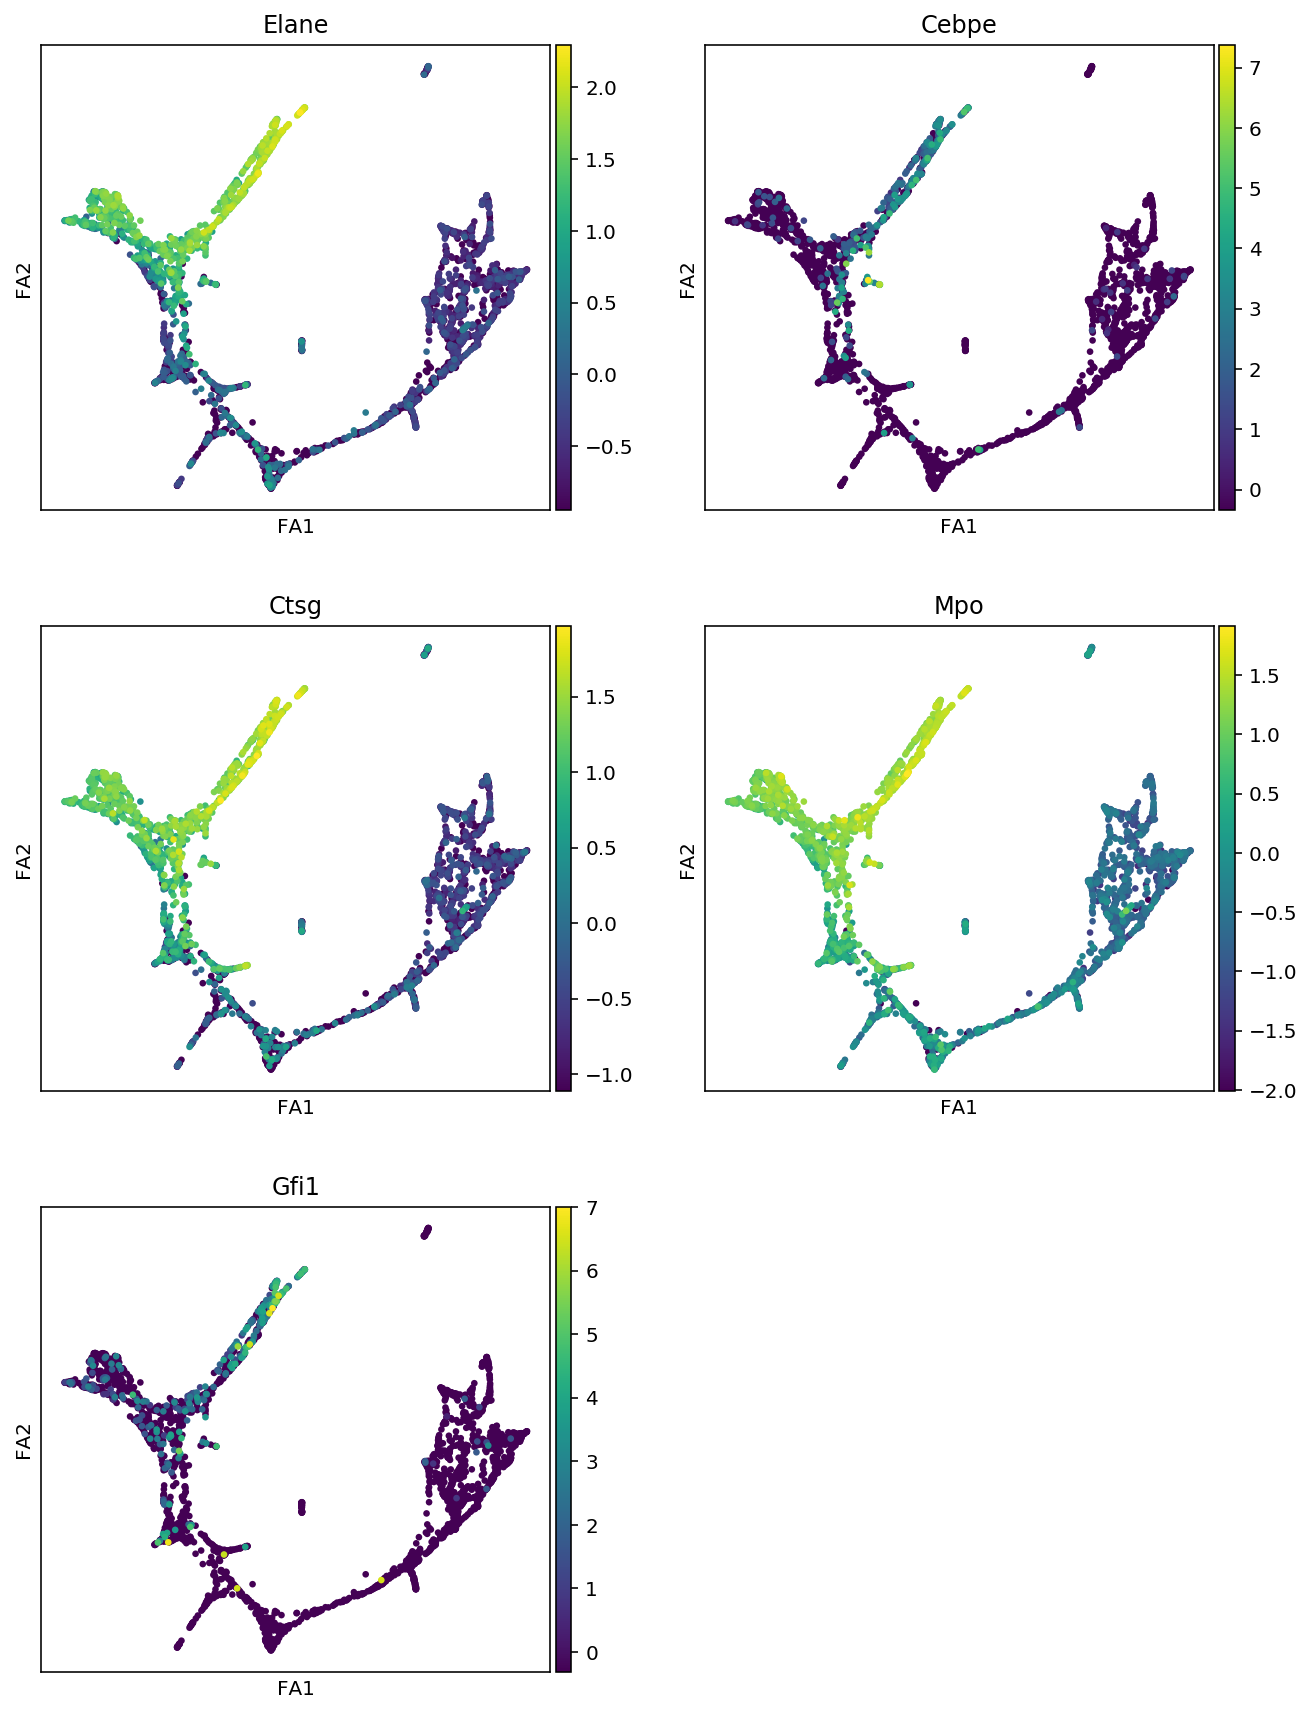 ../../_images/notebooks_03_scRNA-seq_data_preprocessing_scanpy_preprocessing_with_Paul_etal_2015_data_26_2.png